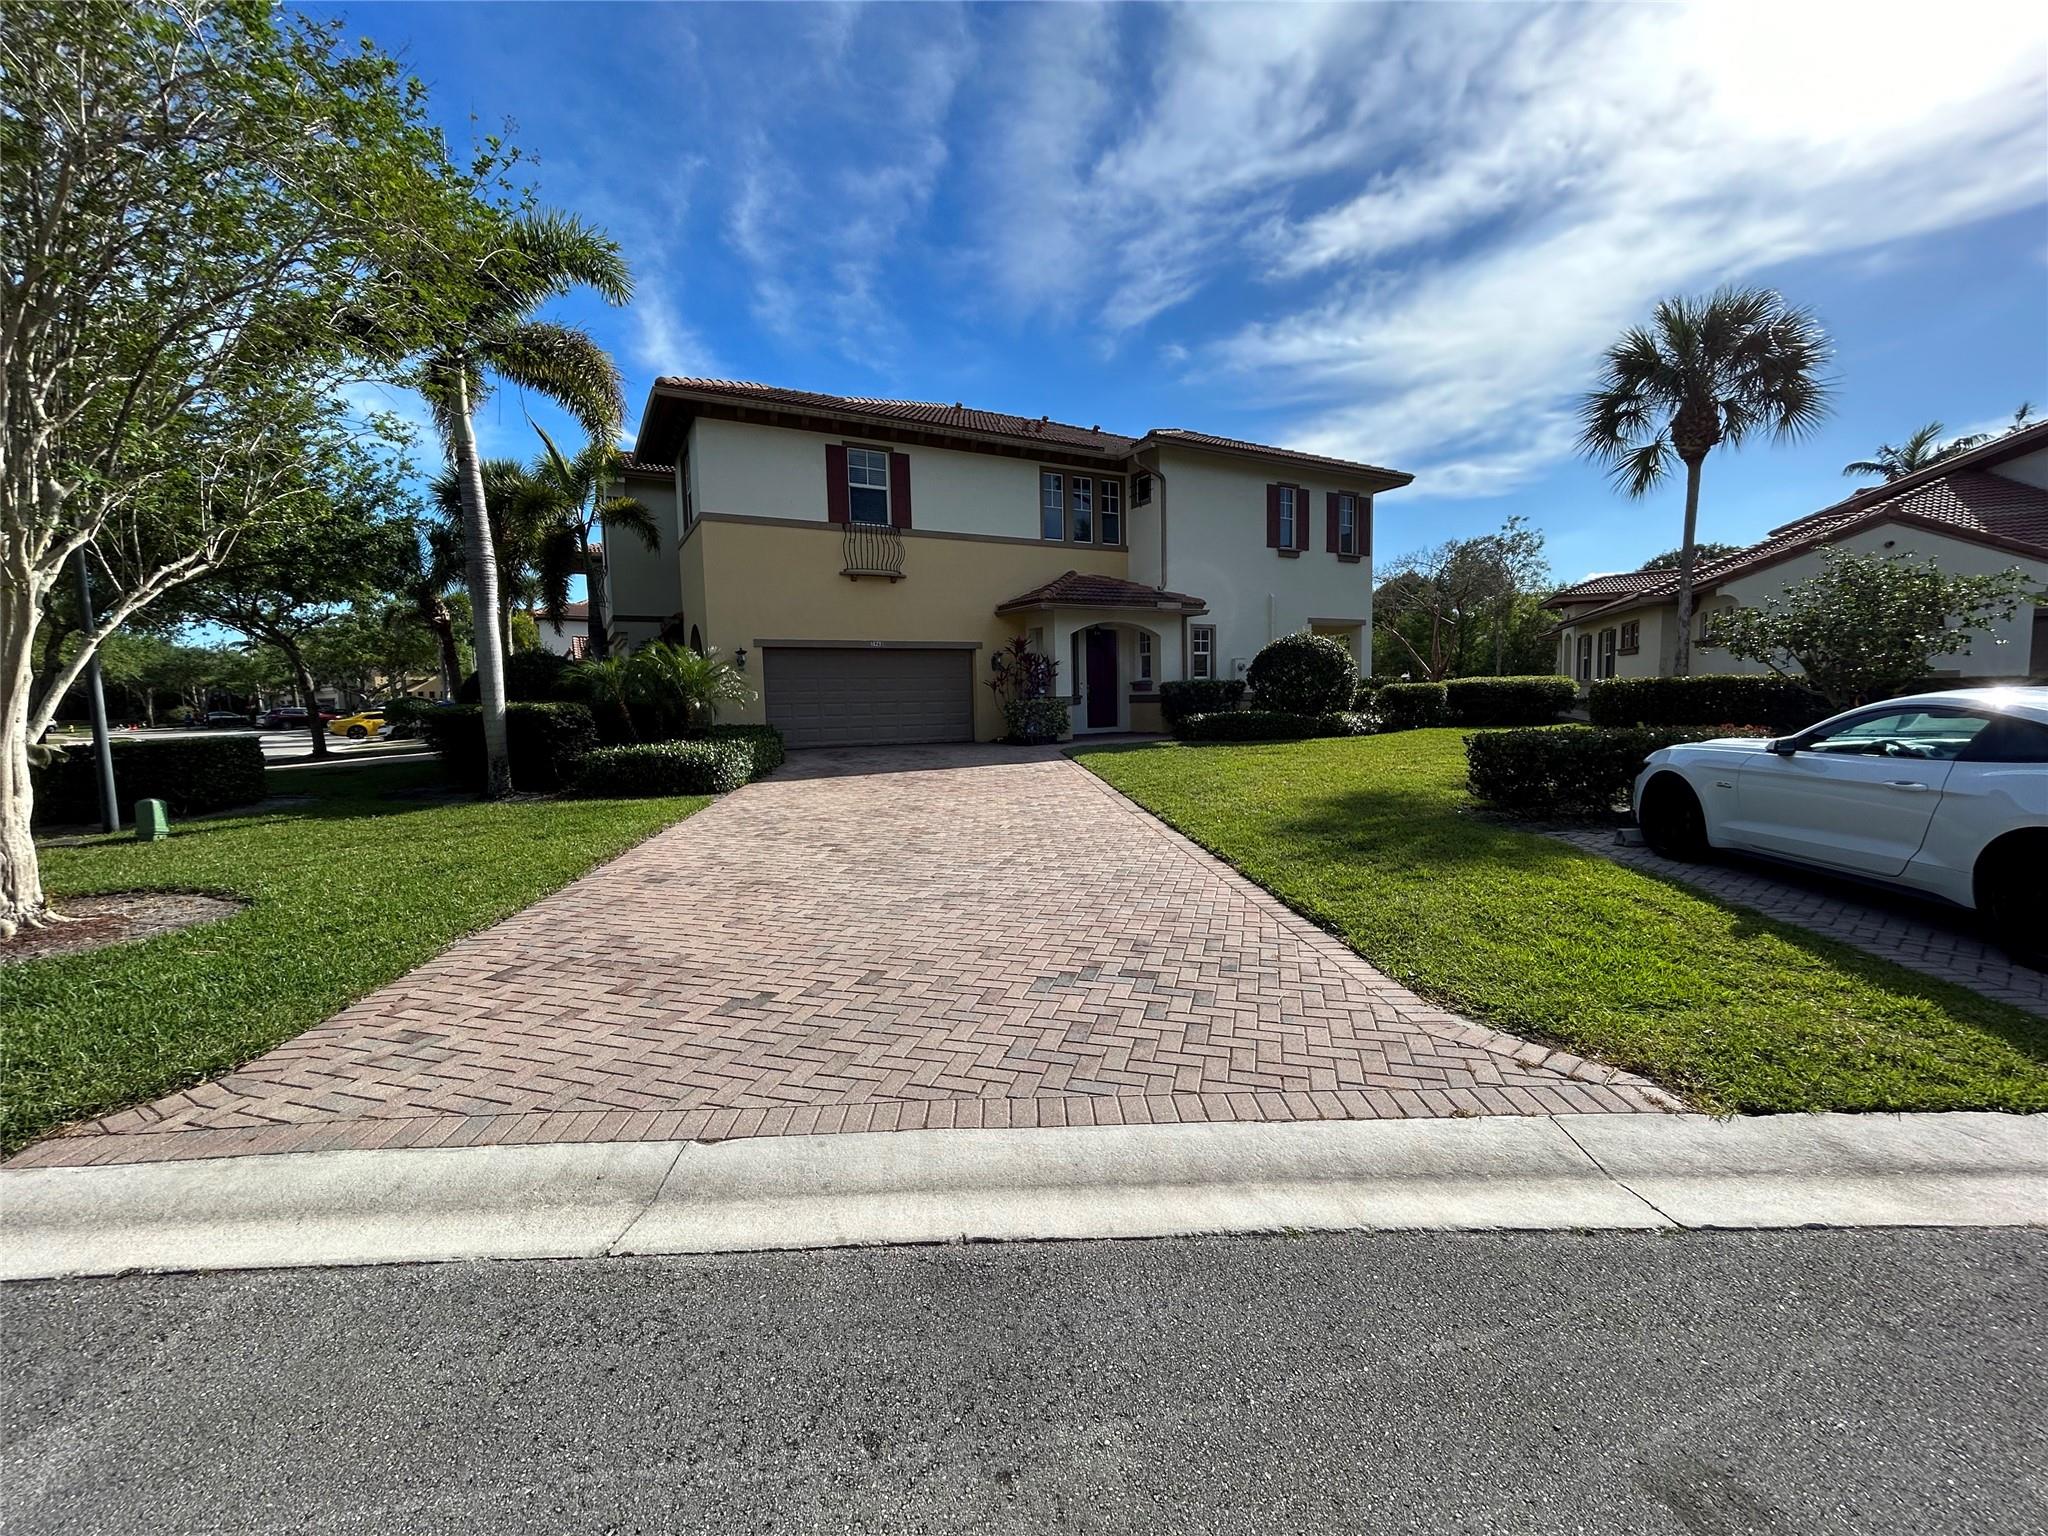 View Coral Springs, FL 33076 townhome